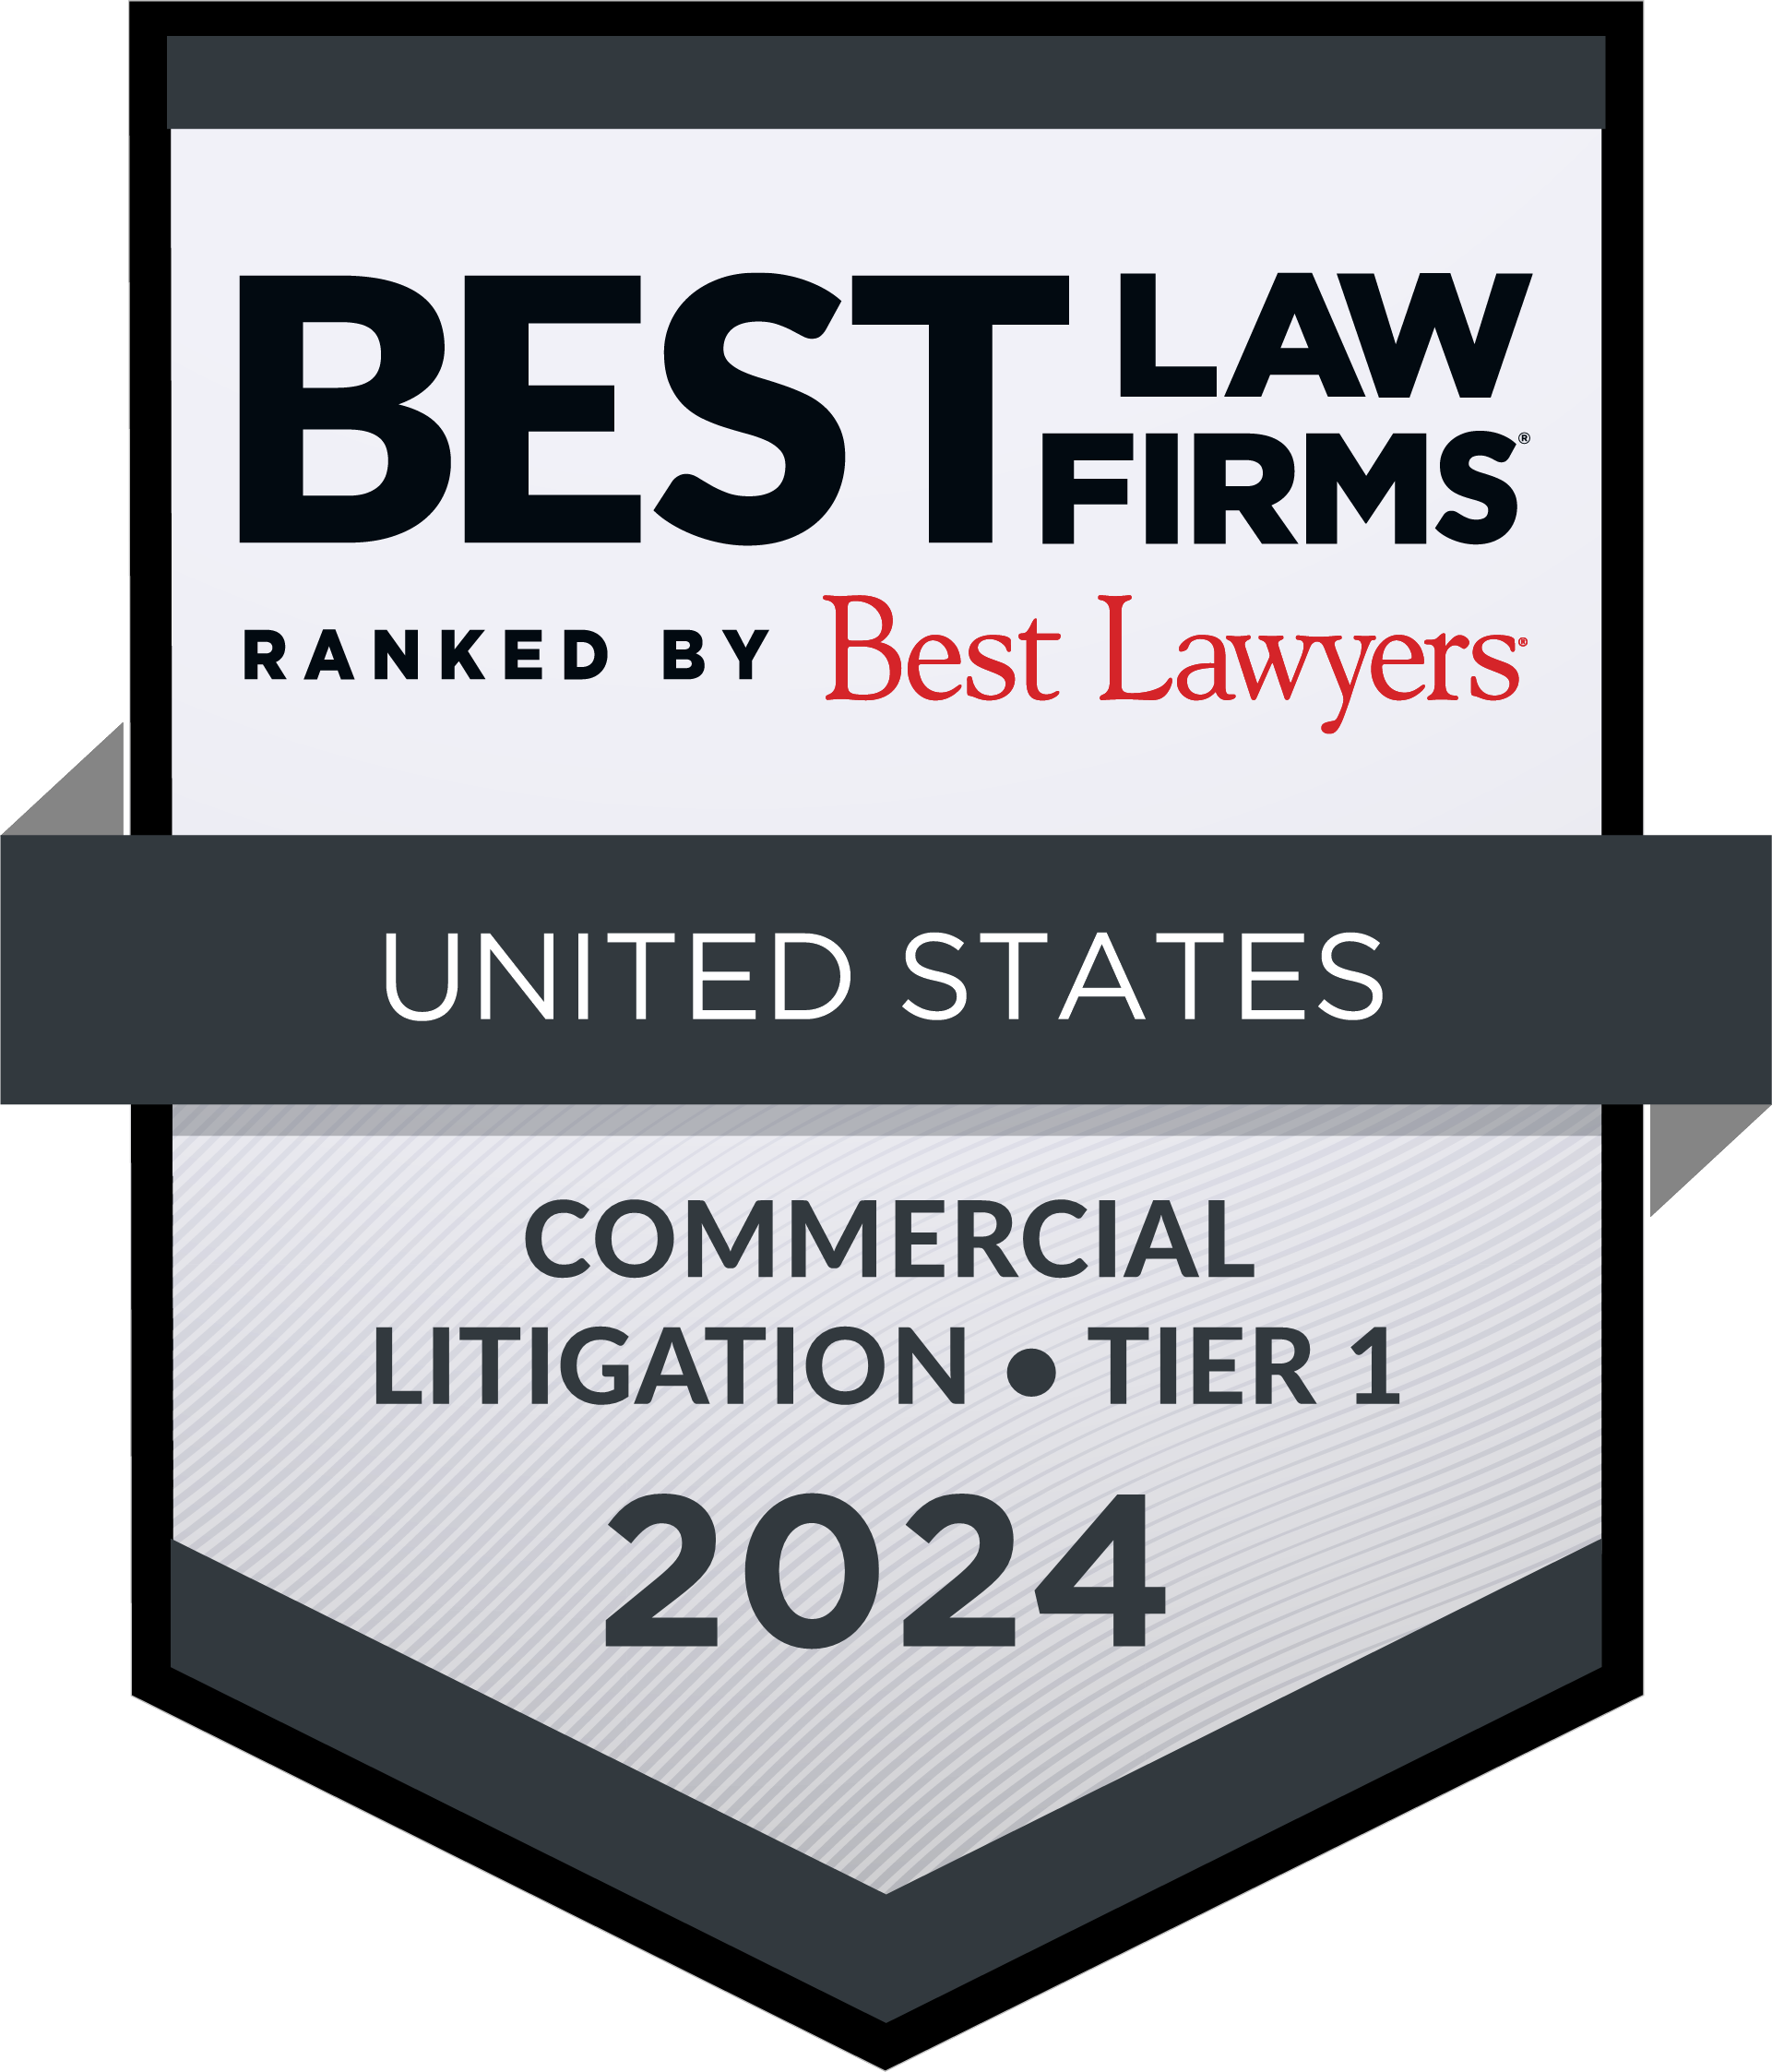 2023 US News Best Law Firms Health Care